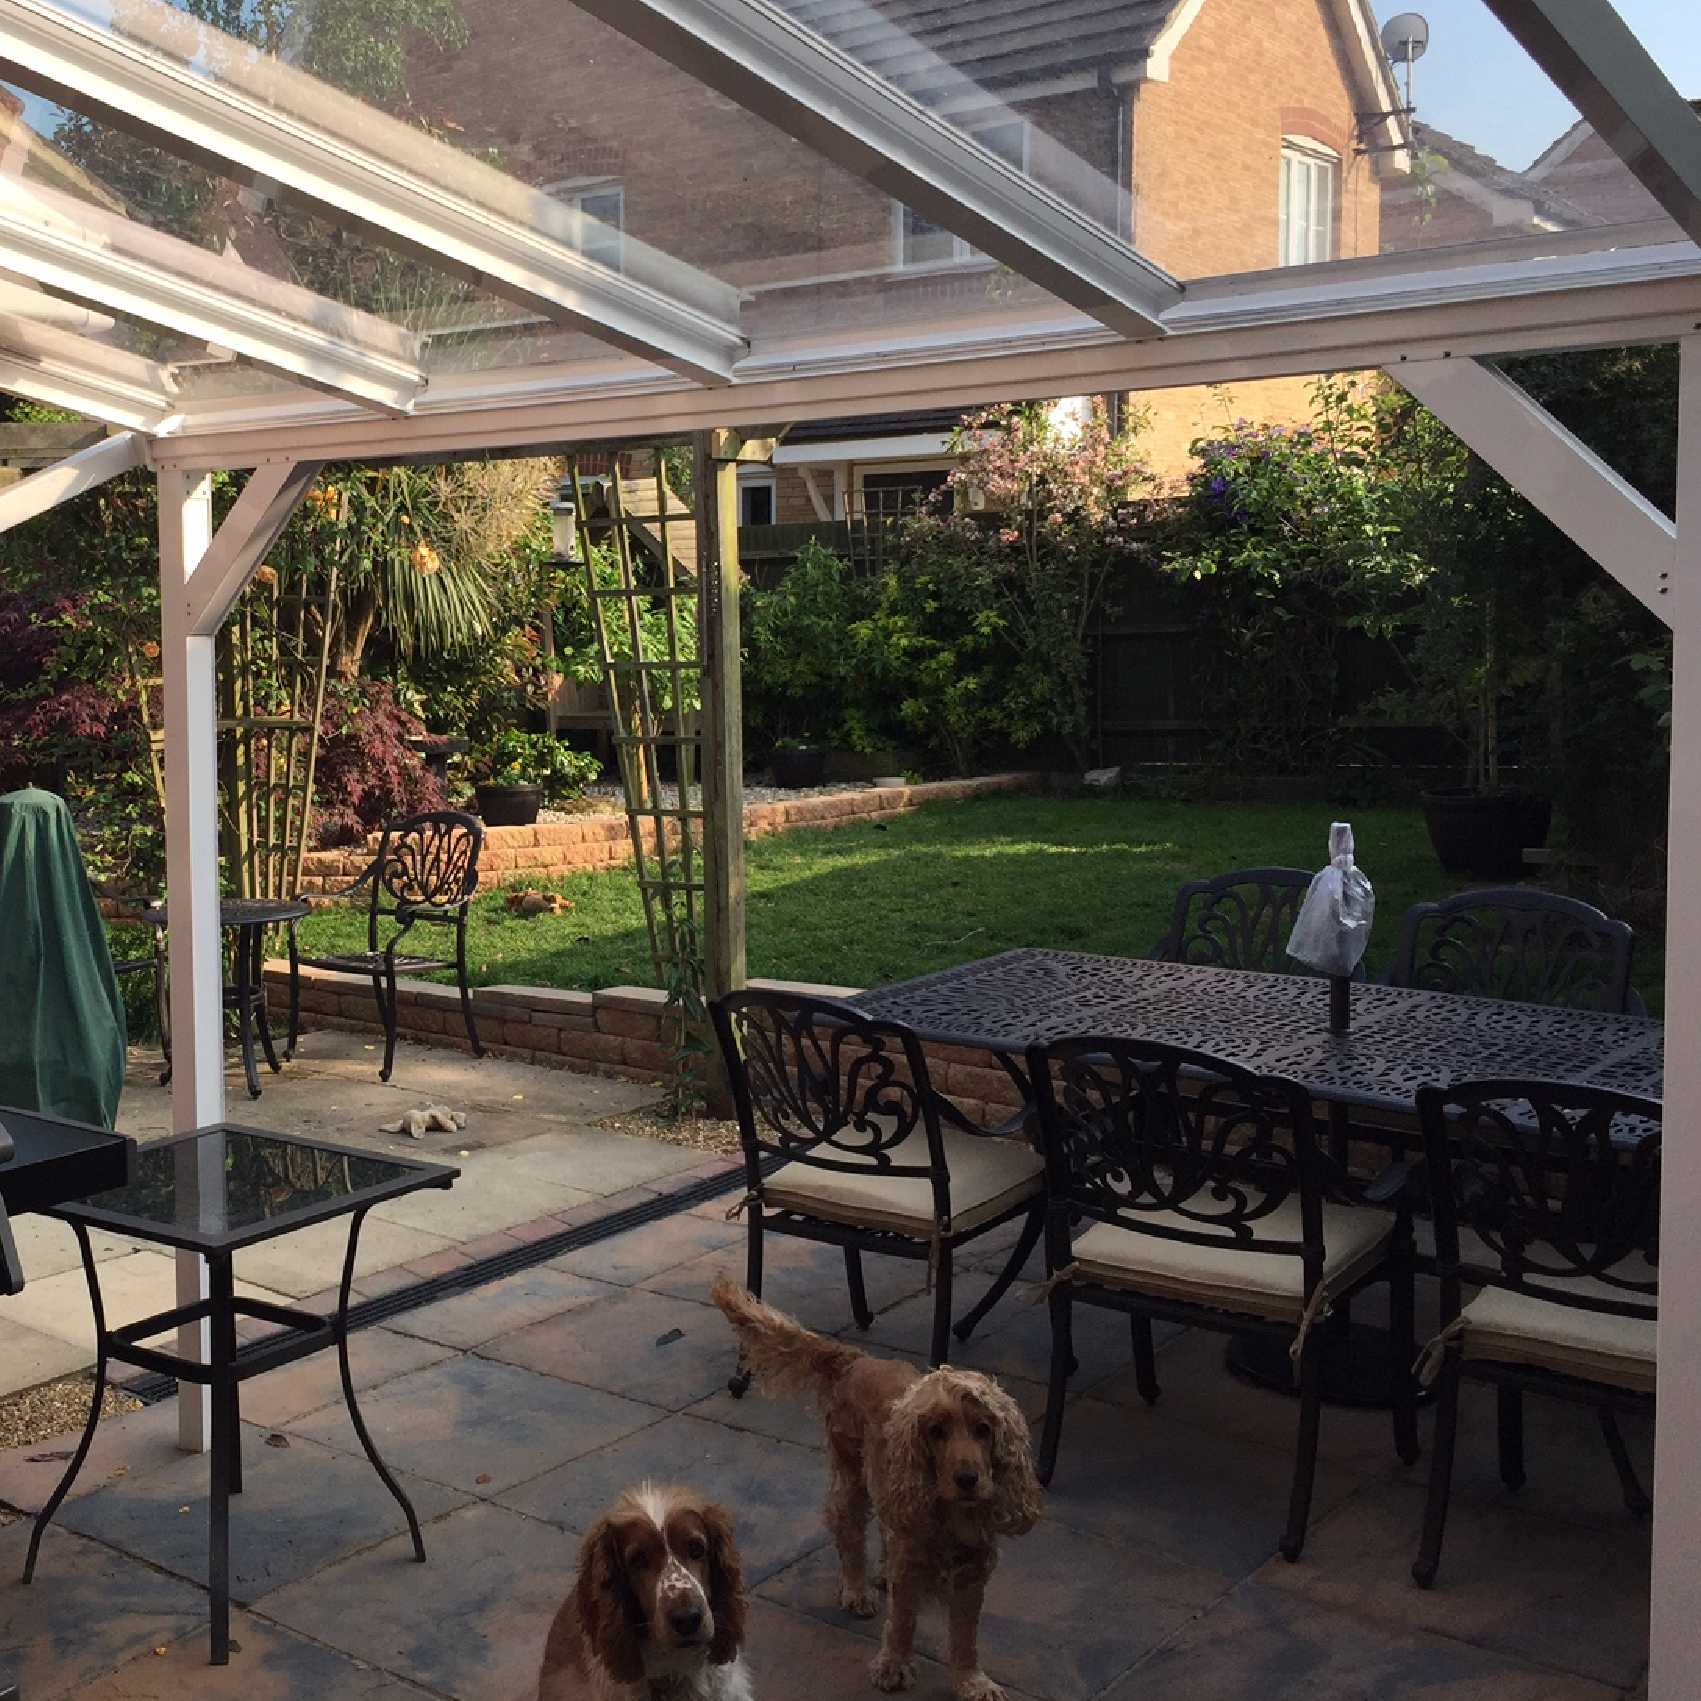 Affordable Omega Smart Lean-To Canopy, White UNGLAZED for 6mm Glazing - 4.2m (W) x 2.5m (P), (3) Supporting Posts